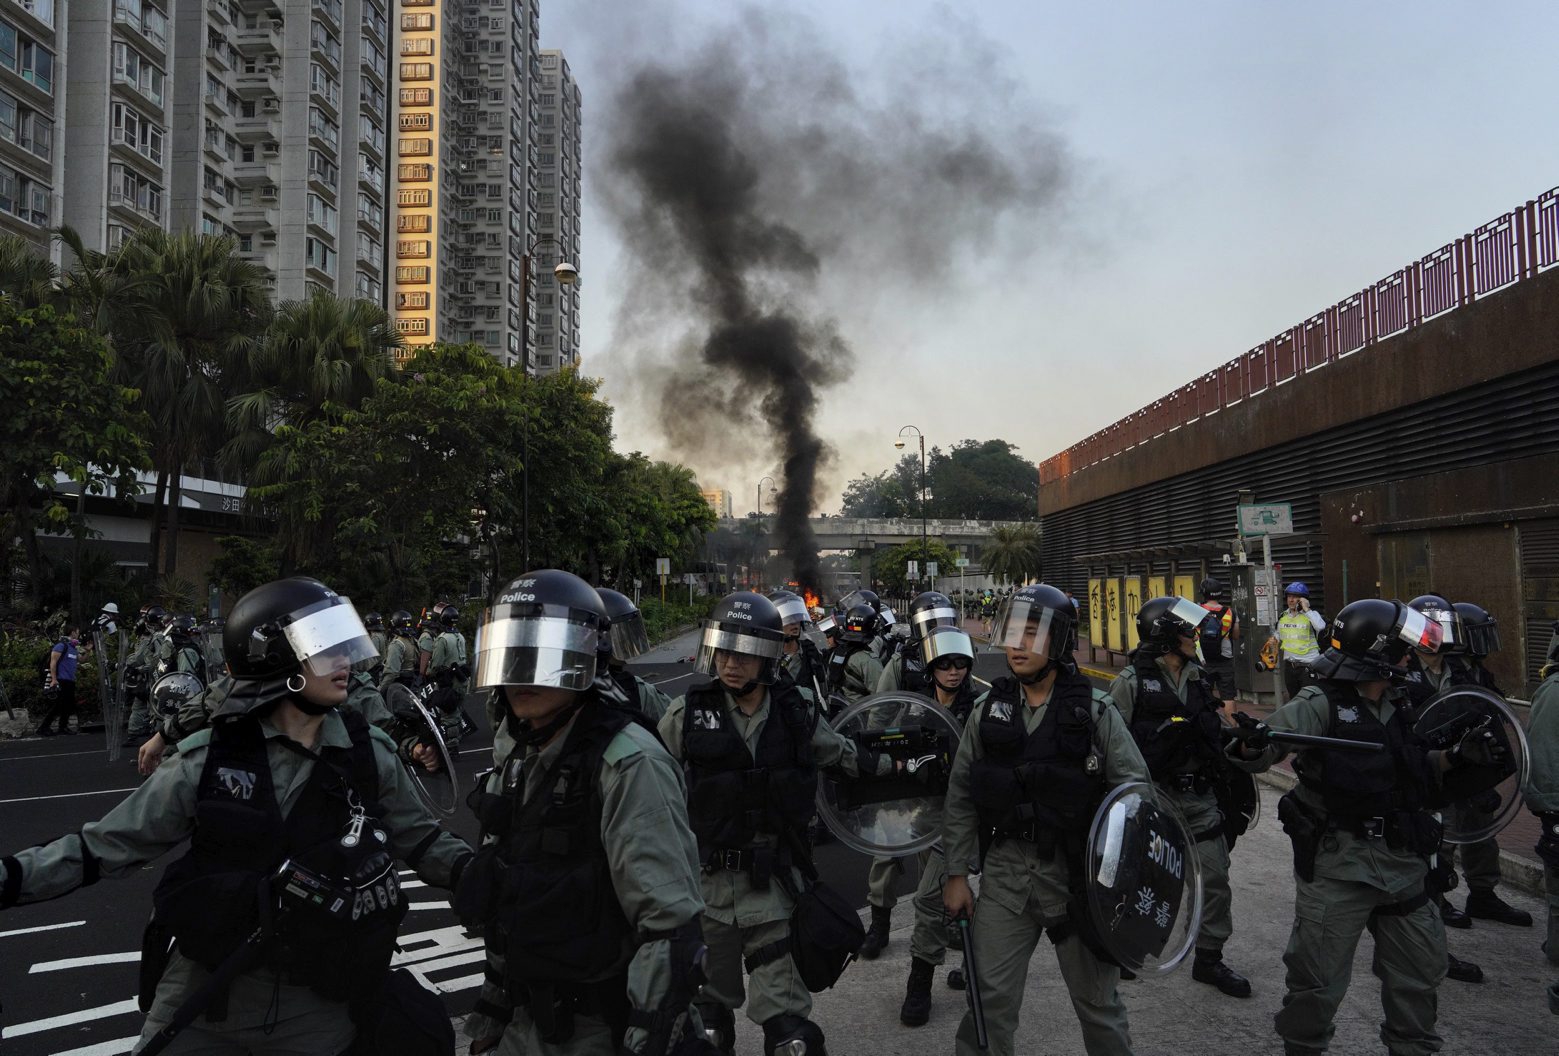 Riot police march past a burning barricade during a protest in Hong Kong on Sunday, Sept. 22, 2019. Hong Kong's pro-democracy protests, now in their fourth month, have often descended into violence late in the day and at night. A hardcore group of protesters says the extreme actions are needed to get the government's attention. (AP Photo/Vincent Yu) Hong Kong Protests